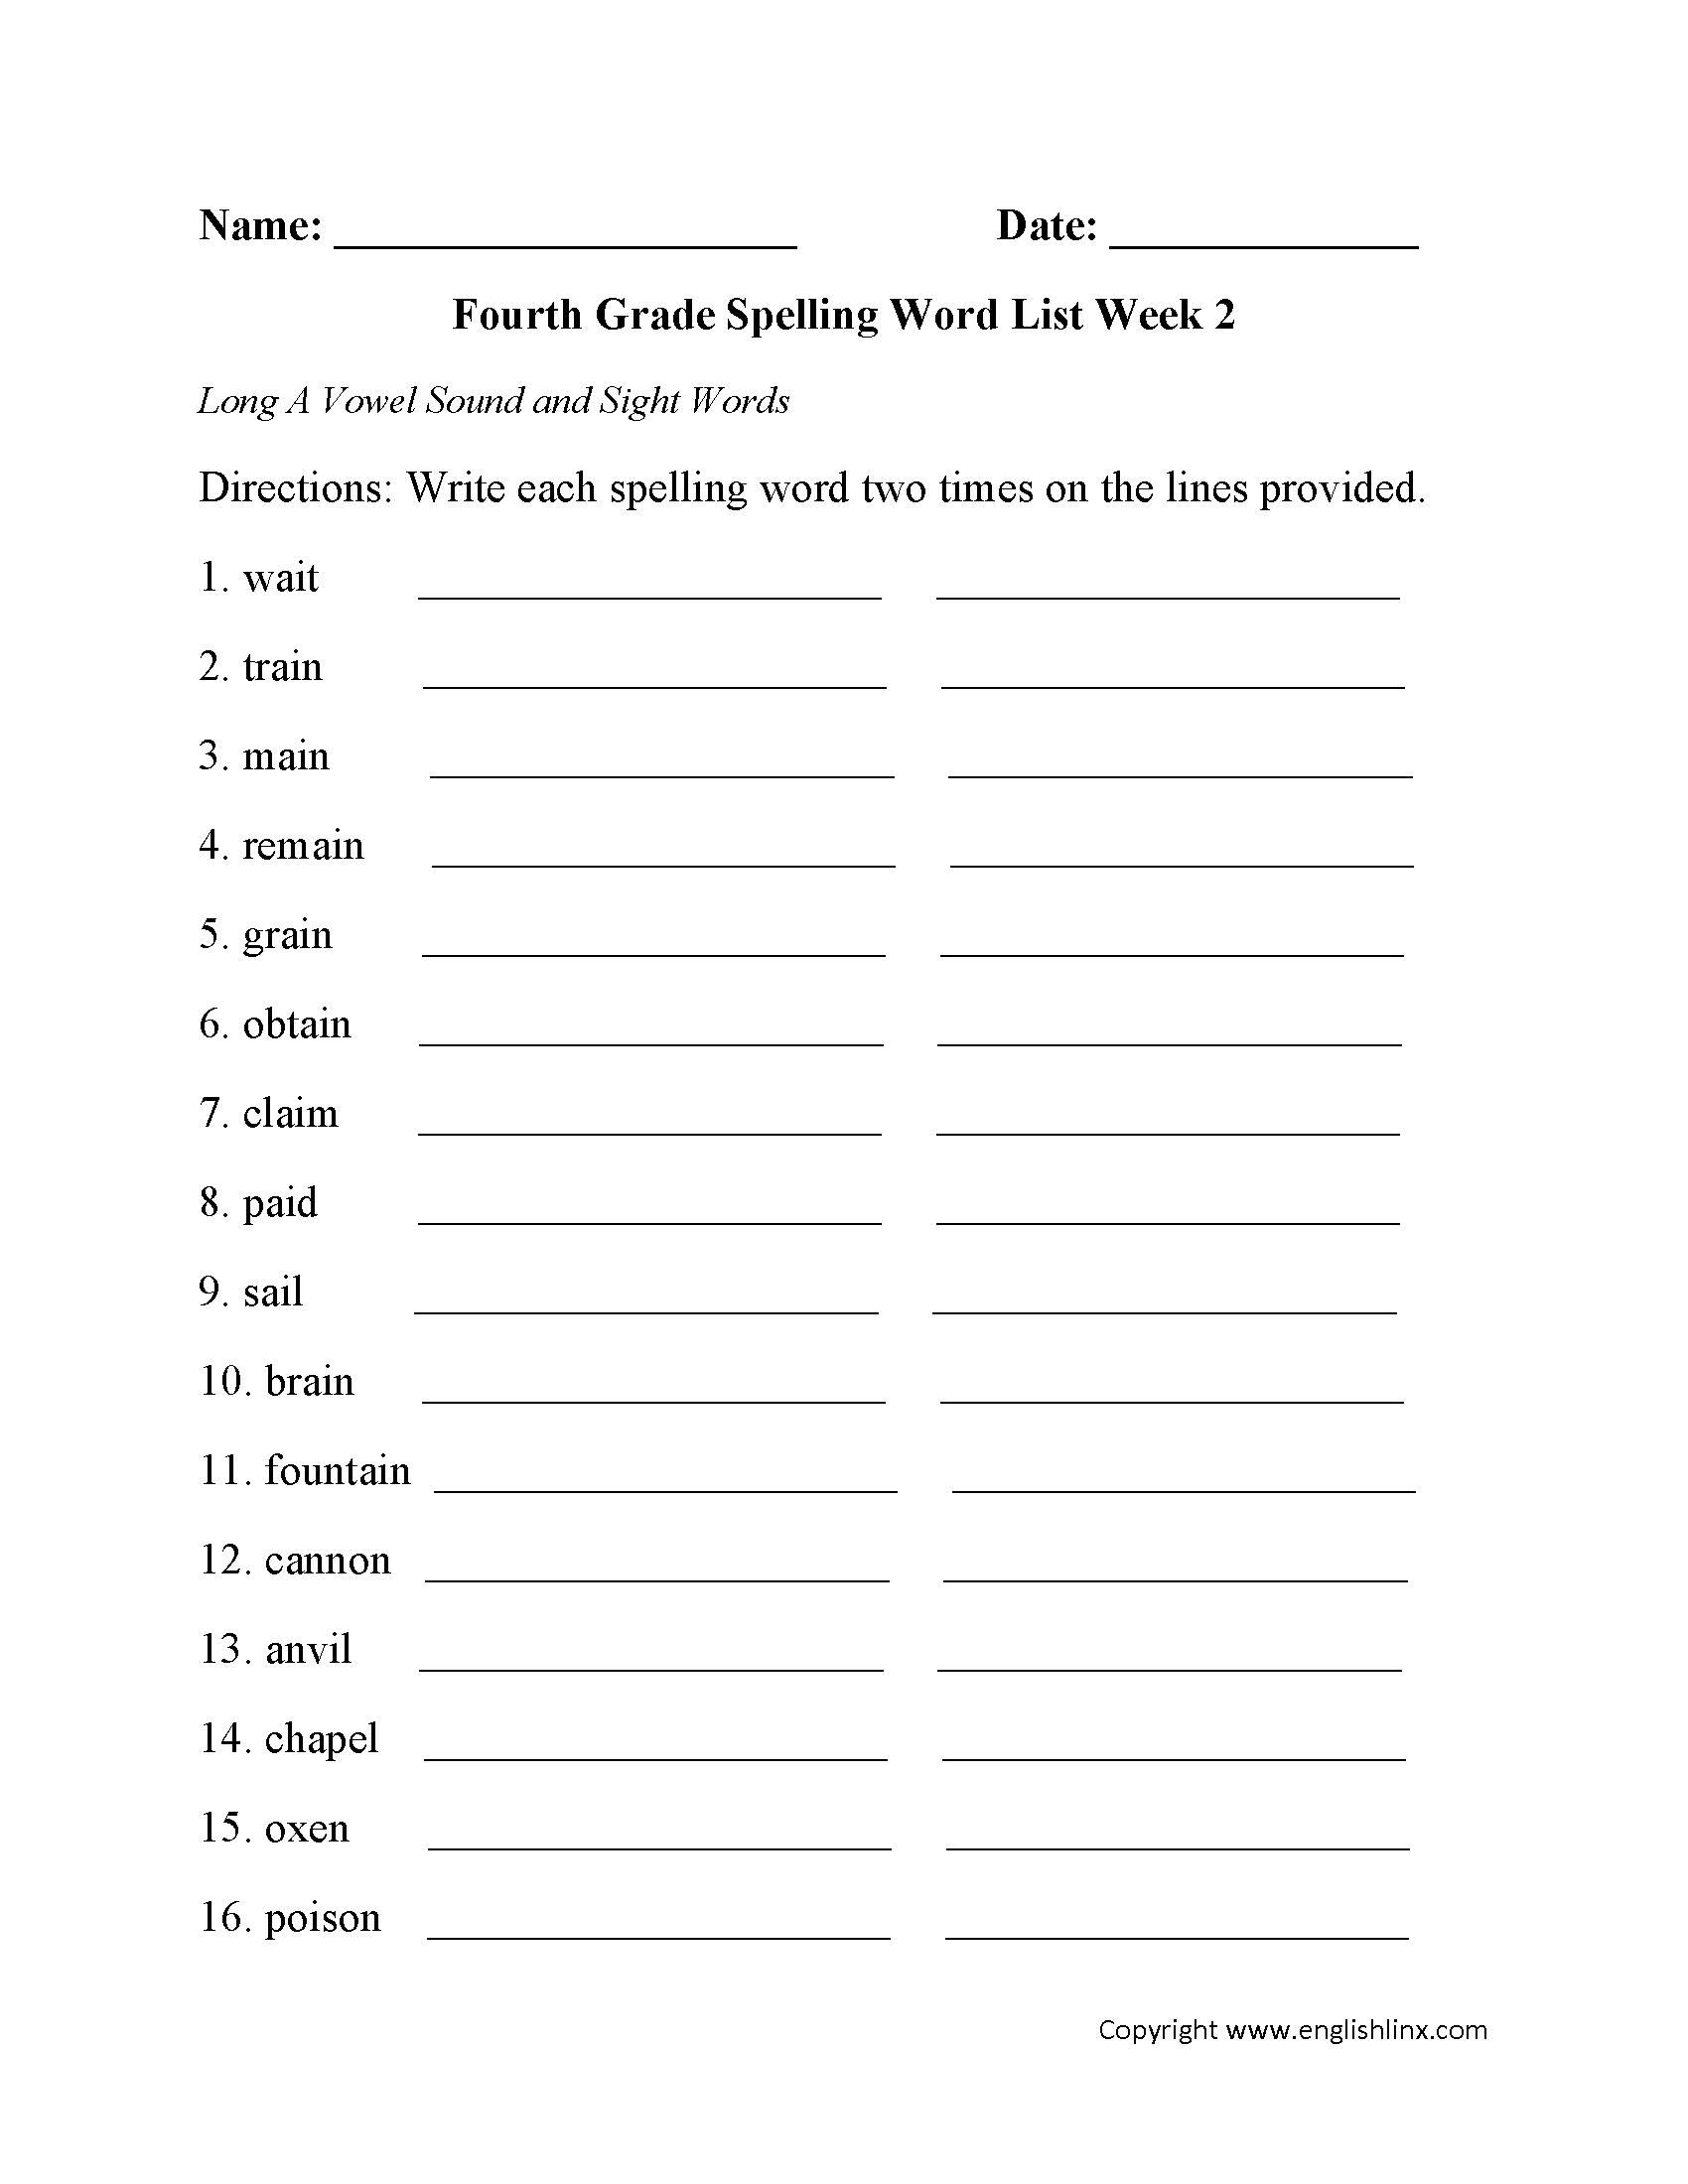 Week 2 Long A Vowel and Sight Words Fourth Grade Spelling Words Worksheets